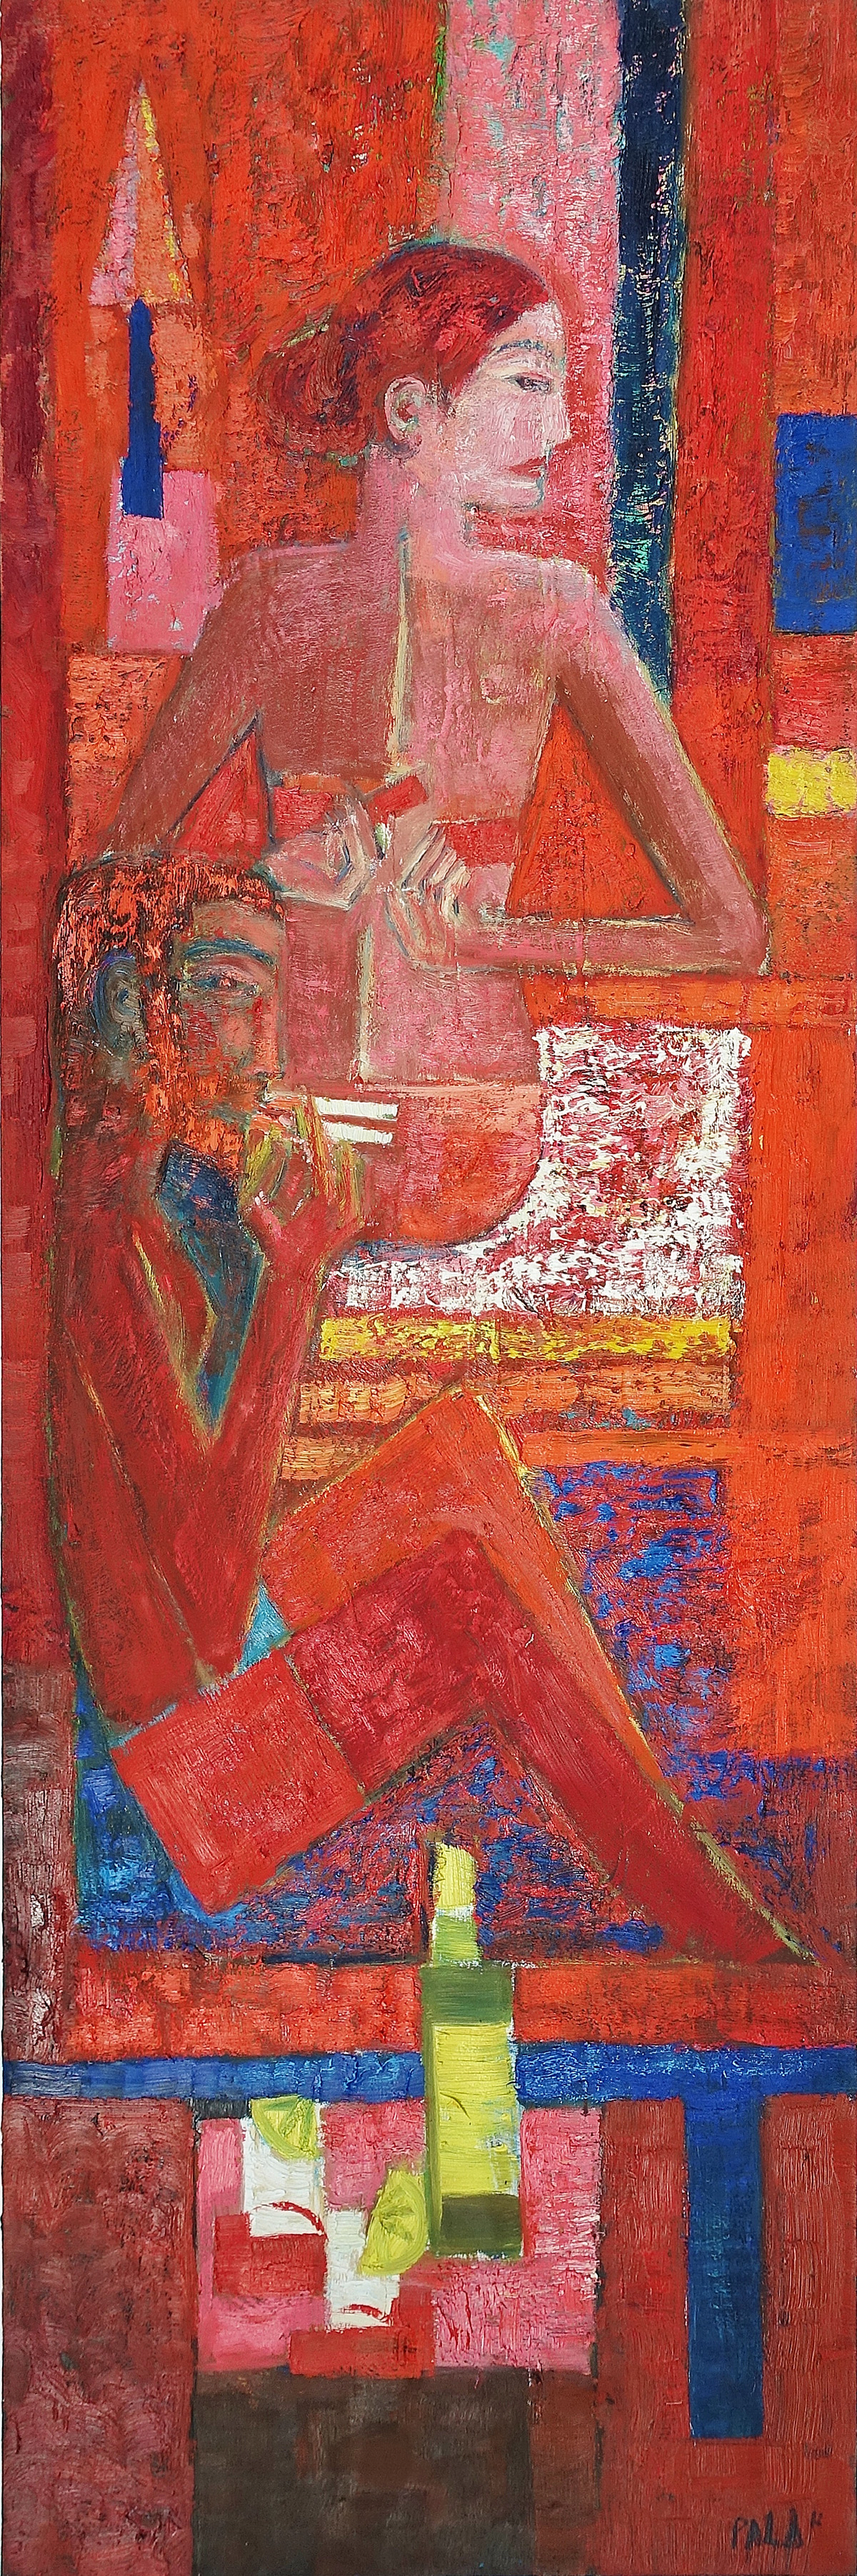 Darek Pala - Tequila and cigarettes (Oil on Canvas | Size: 66 x 186 cm | Price: 15000 PLN)